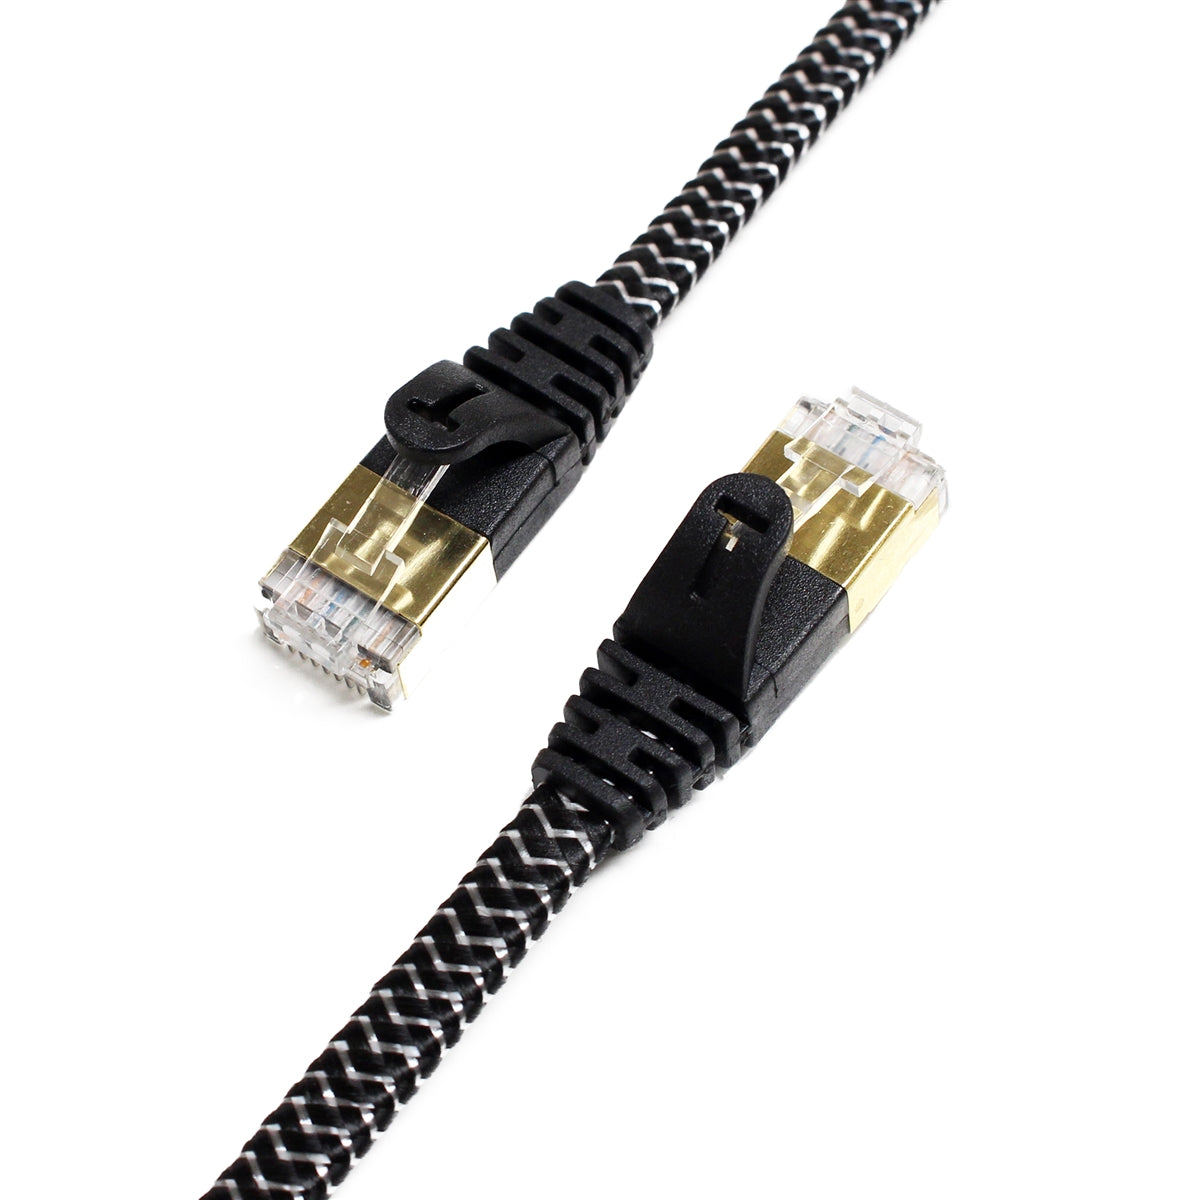 CAT7 Ultra Flat Braided Ethernet Cables